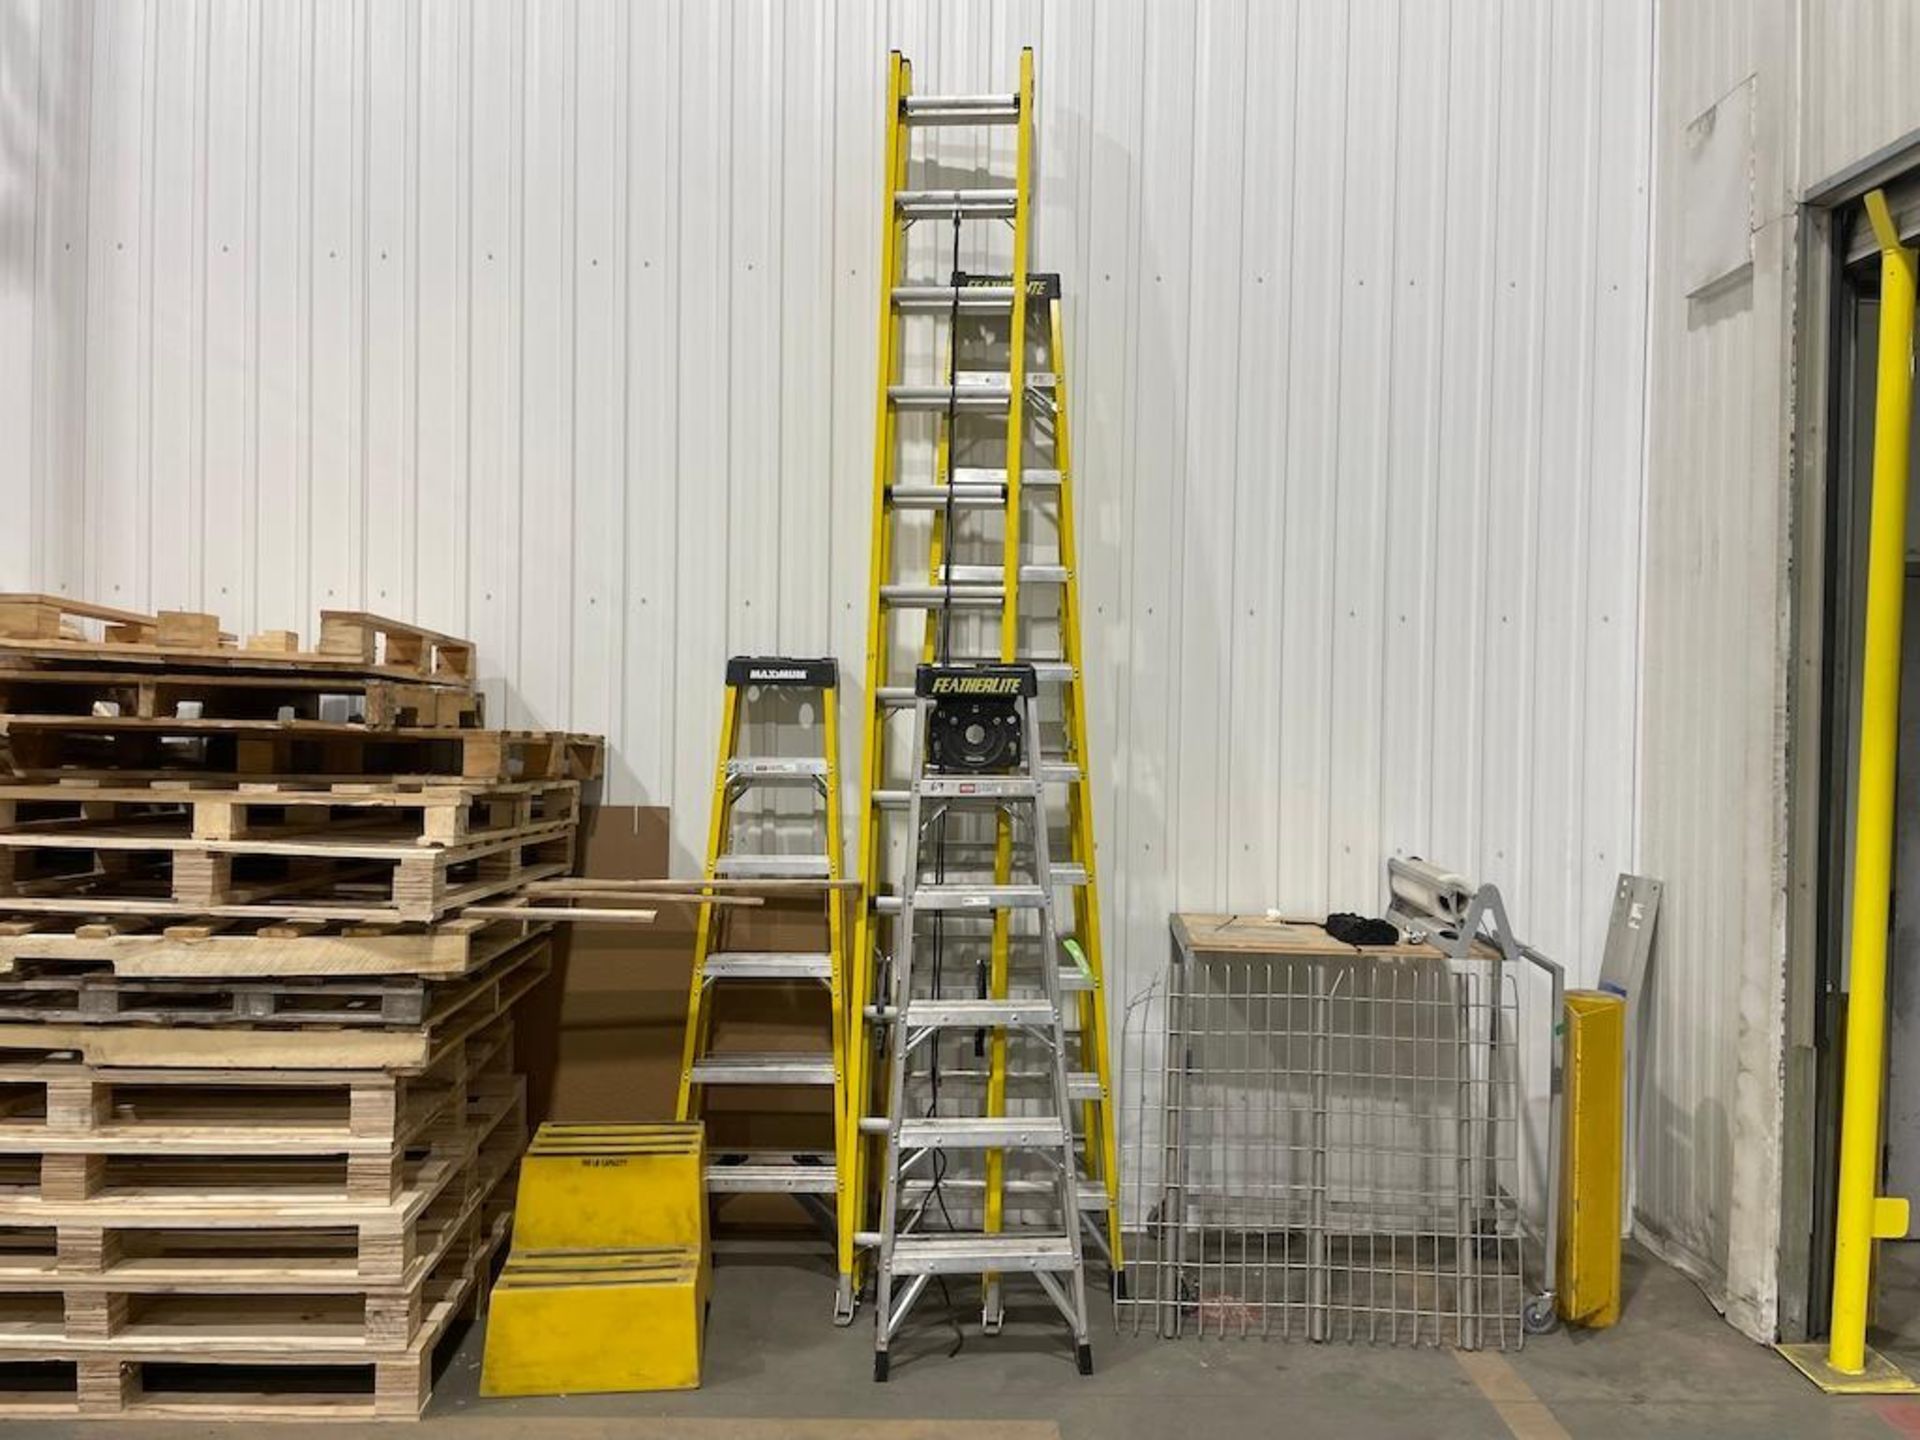 LOT ASST LADDERS AND STEEL FRAME STAIRS [TROIS RIVIERES]*PLEASE NOTE, EXCLUSIVE RIGGING FEE OF $150